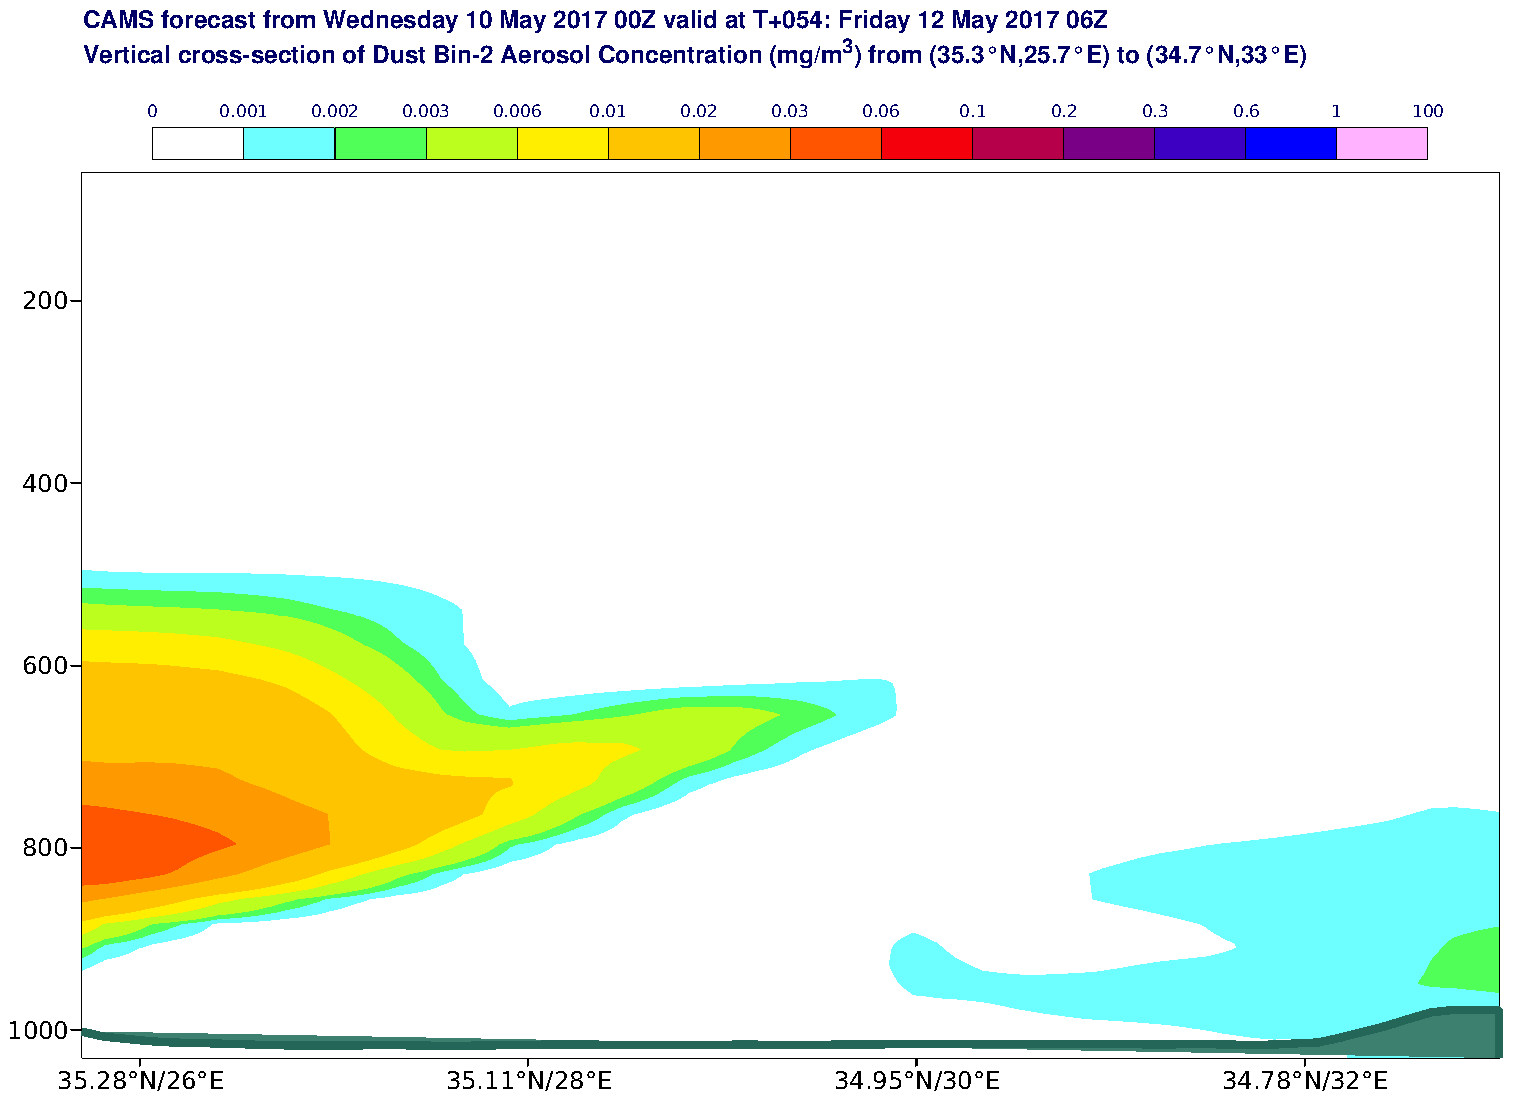 Vertical cross-section of Dust Bin-2 Aerosol Concentration (mg/m3) valid at T54 - 2017-05-12 06:00